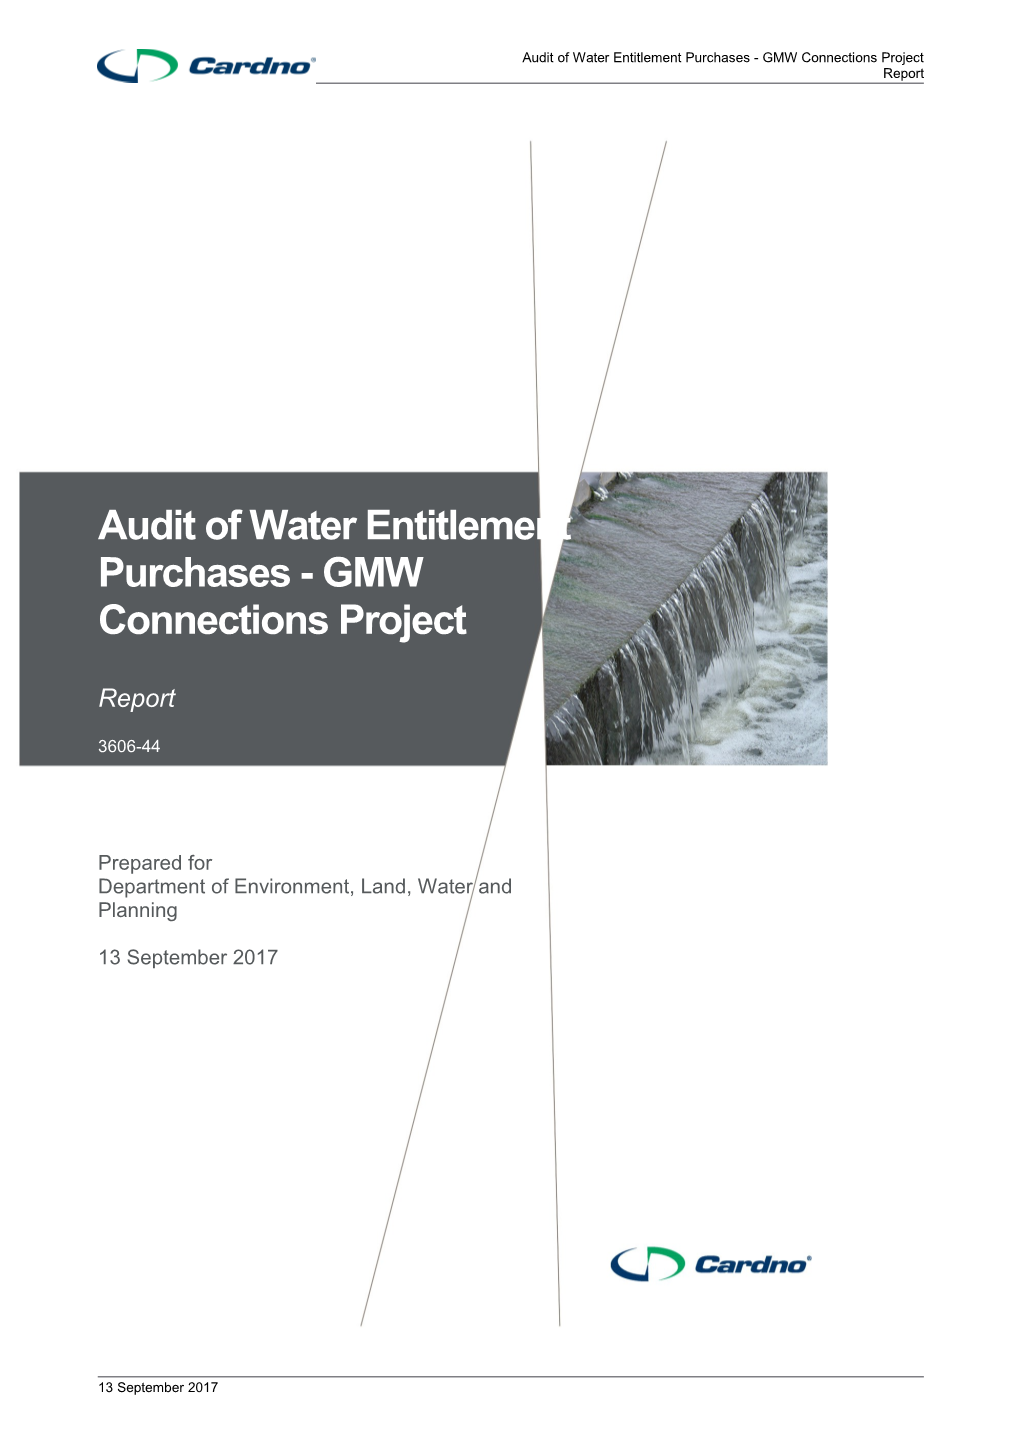 Audit of Water Entitlement Purchases - GMW Connections Project